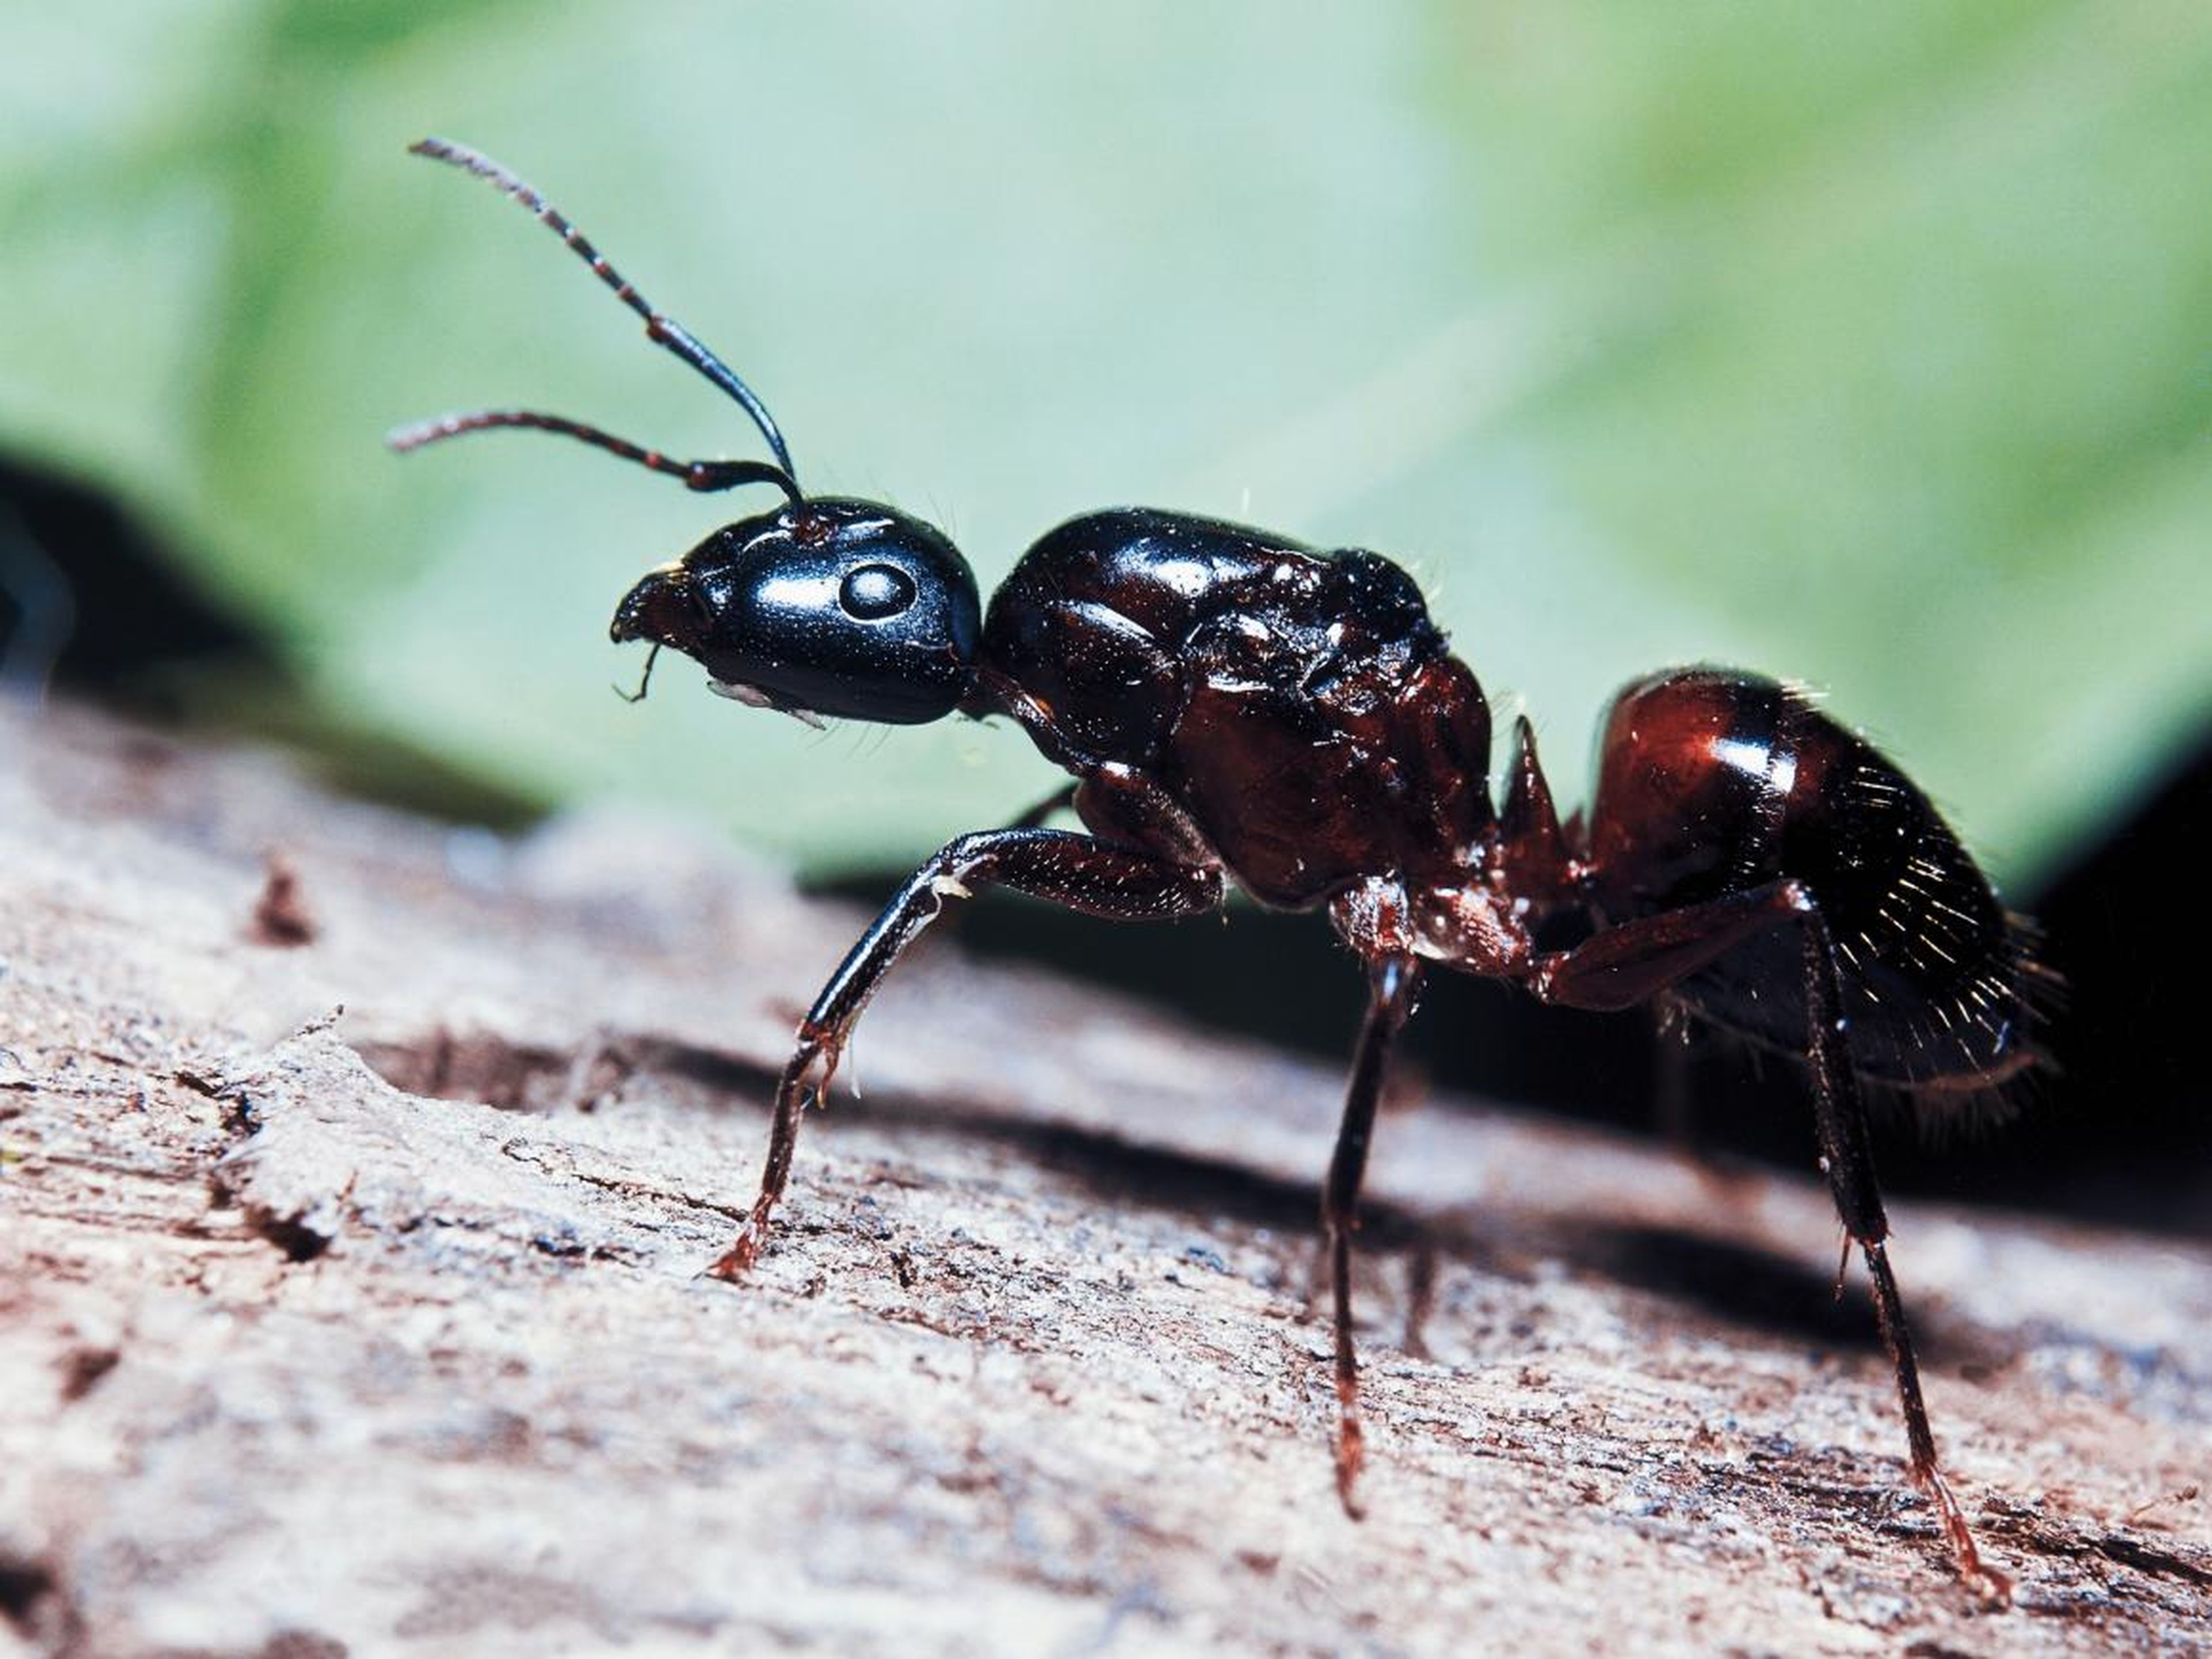 Carpenter ants are the victims of choice for a fungus called Ophiocordyceps unilateralis.